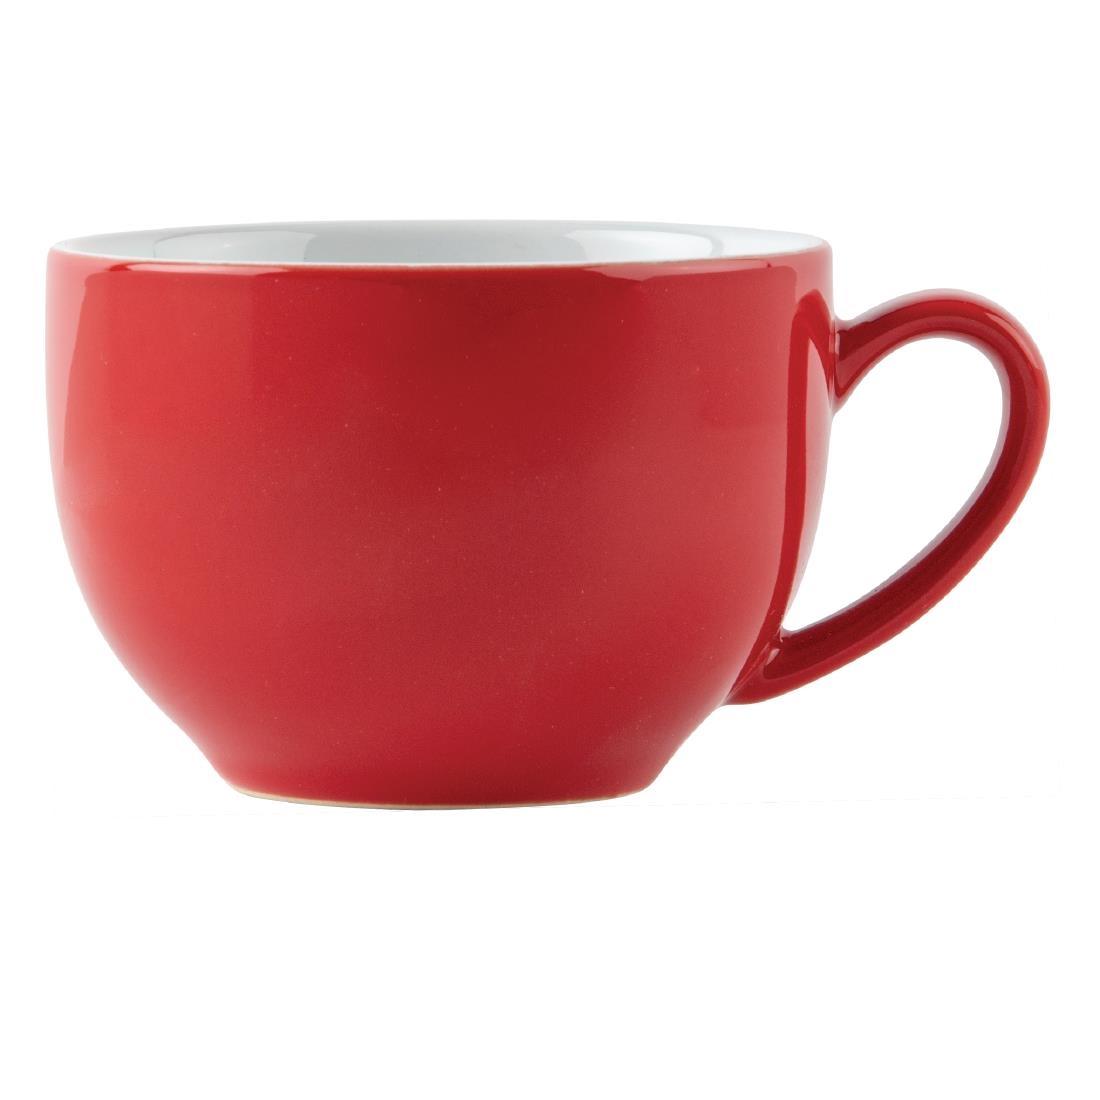 Olympia Cafe Cappuccino Cups Red 340ml (Pack of 12) - GK076  - 4